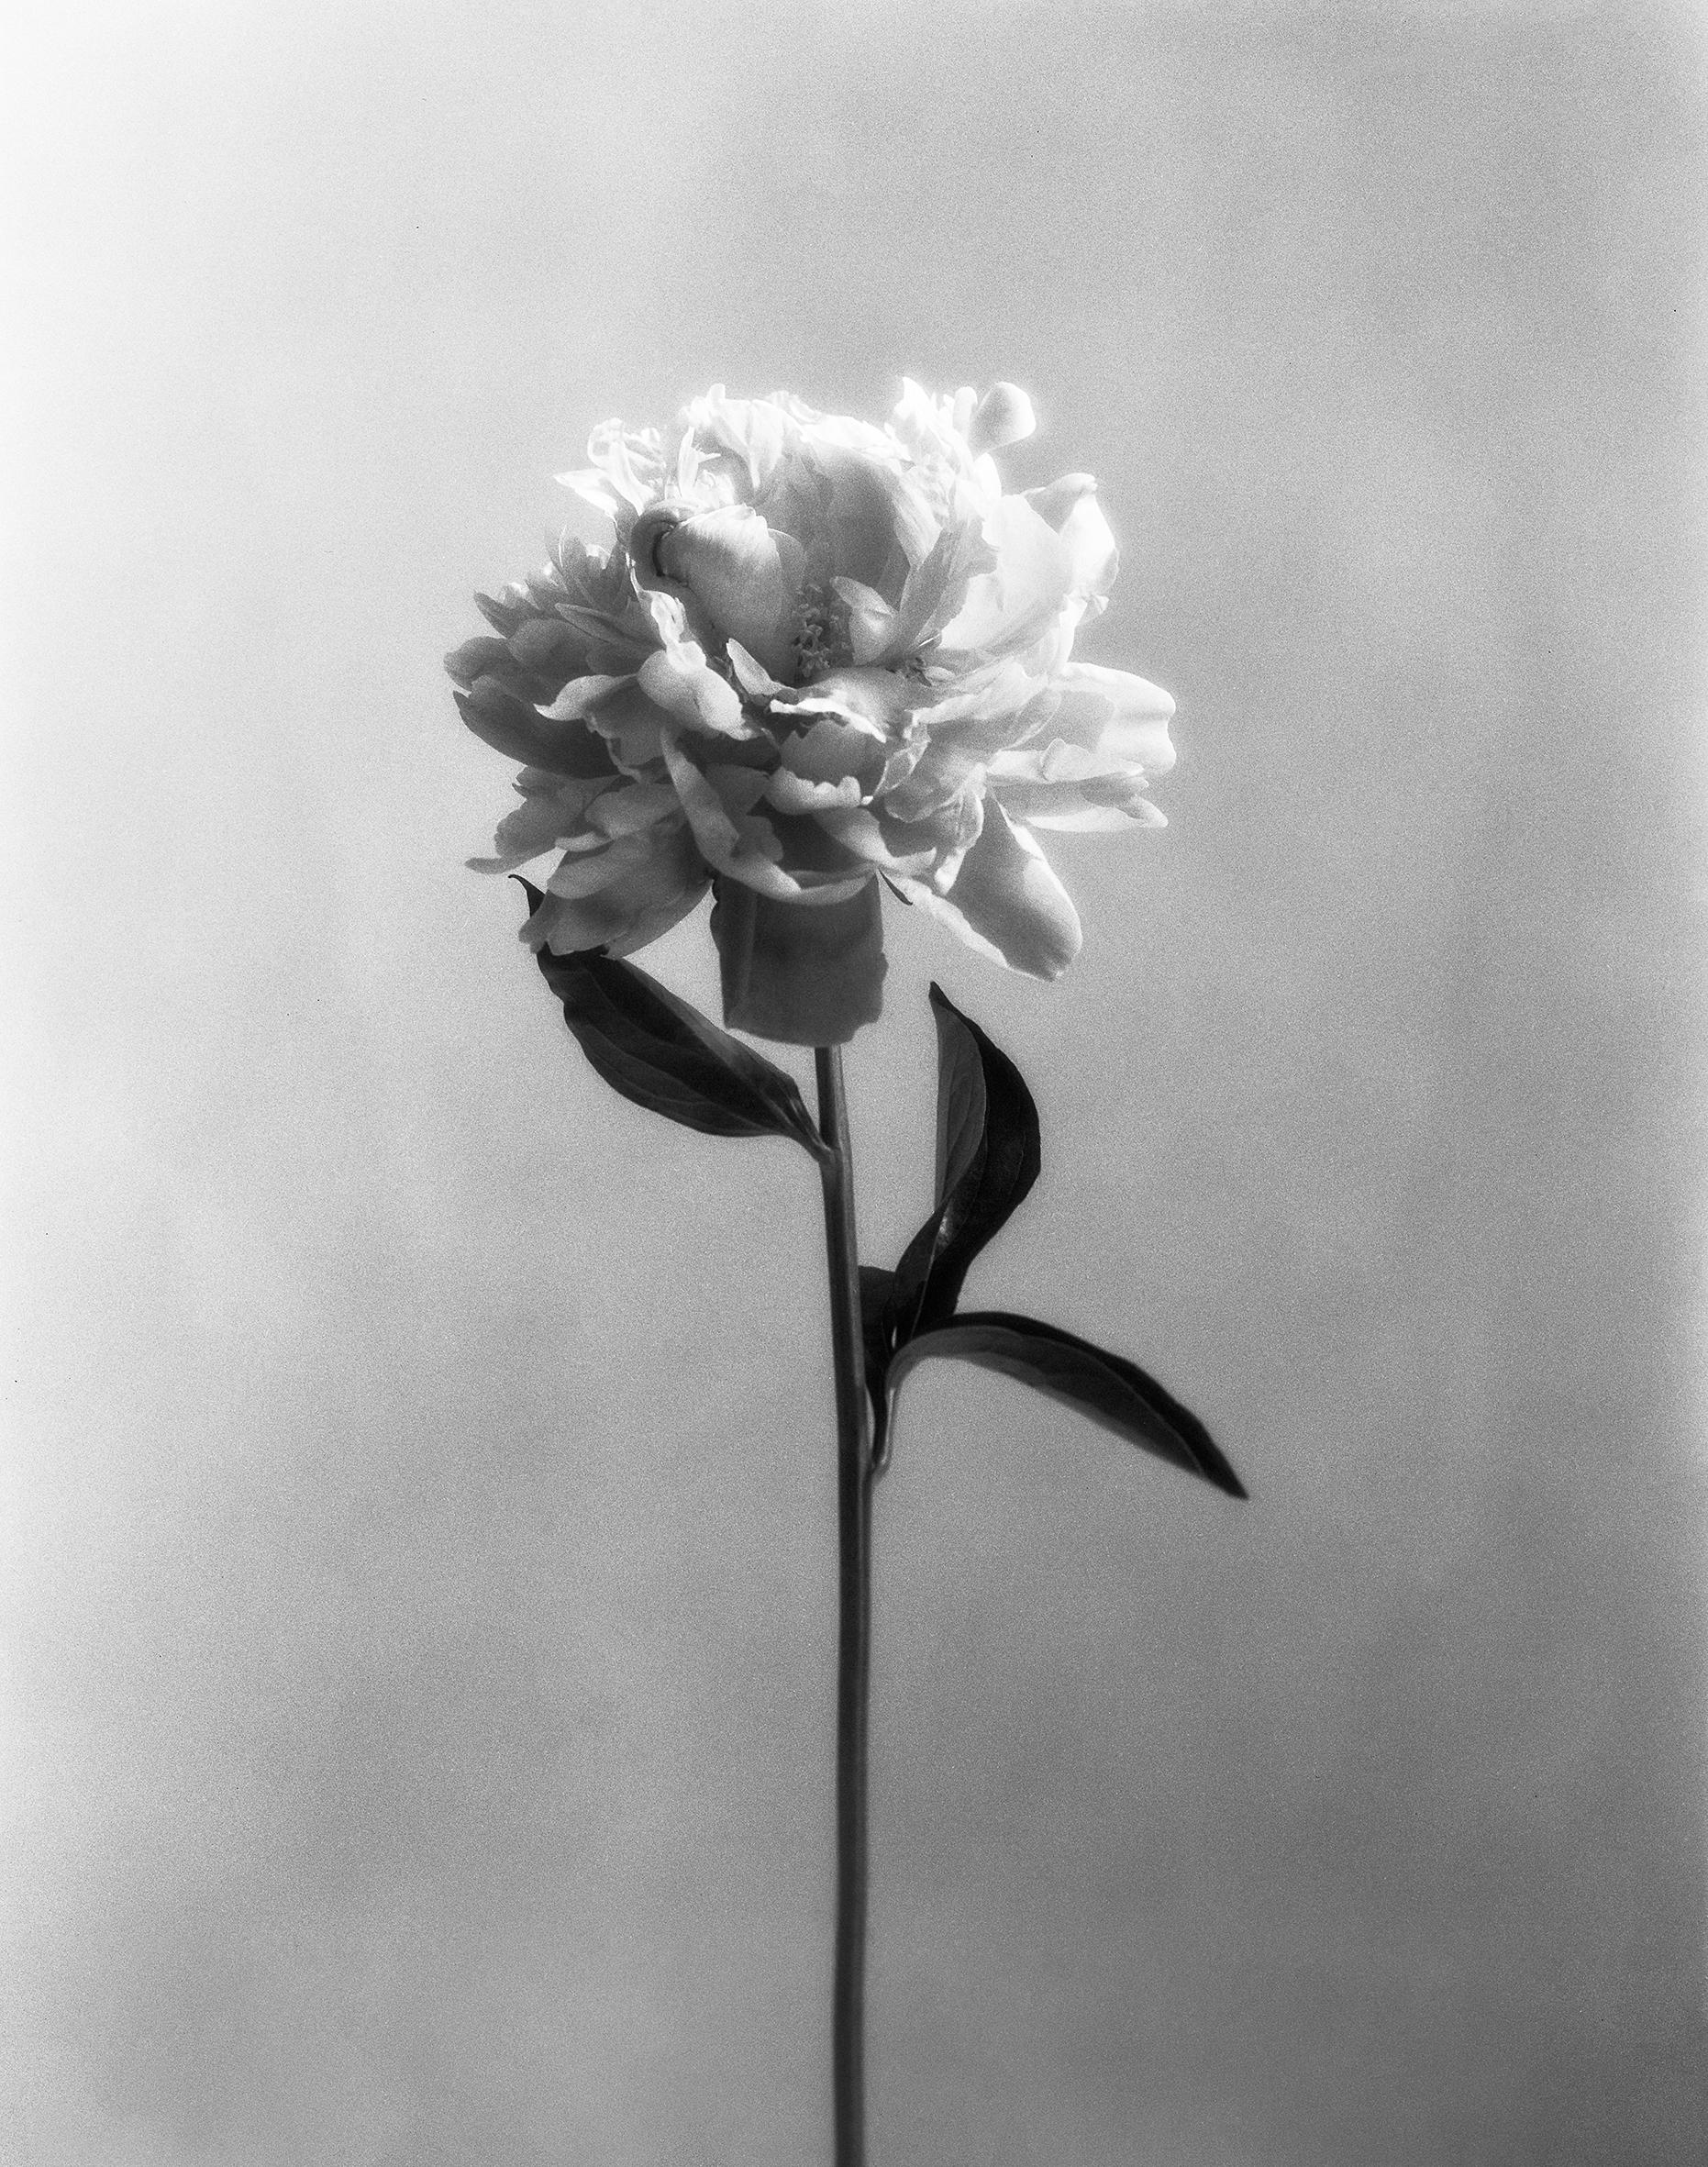 Ugne Pouwell Still-Life Photograph - Peony no.4 - analogue black and white floral photography